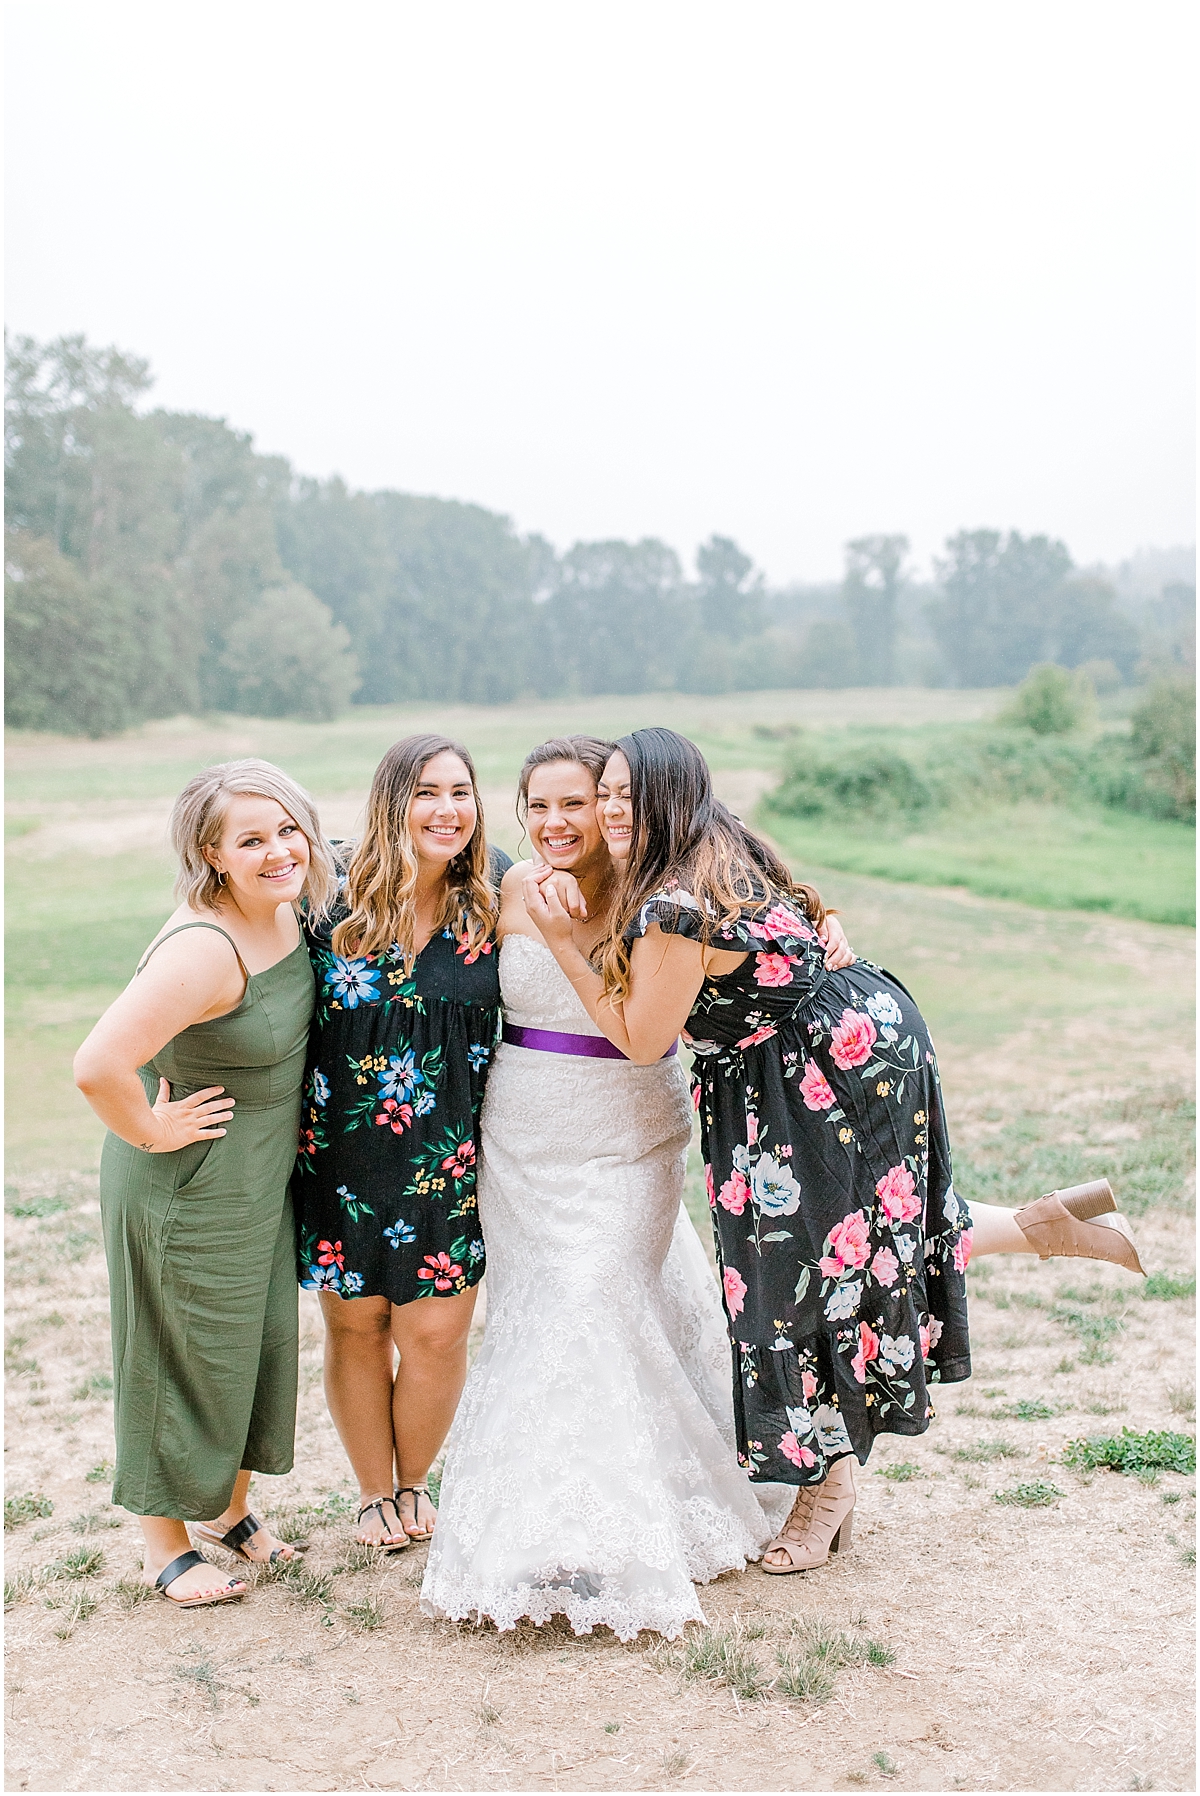 Sunflower themed wedding with purple accents, Emma Rose Company Seattle Wedding Photographer, Light and Airy photographer Kindred Presets Wedding Details PNW_0181.jpg